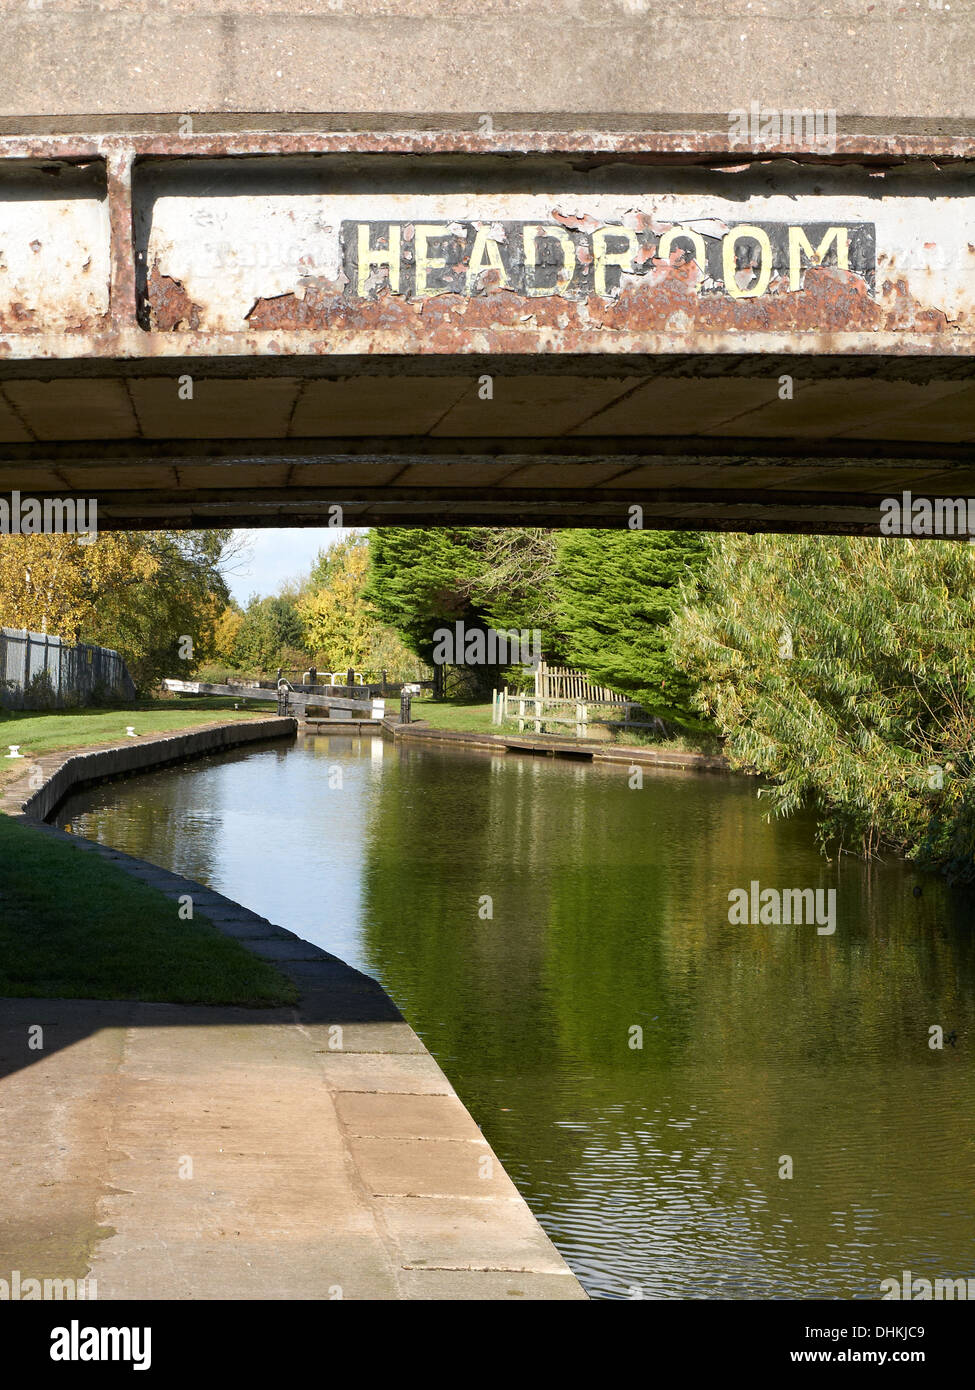 Headroom sign bridge 161 on the Trent & Mersey Canal also known as Crowns Nest Bridge with Crowns lock in distance, Sandbach UK Stock Photo